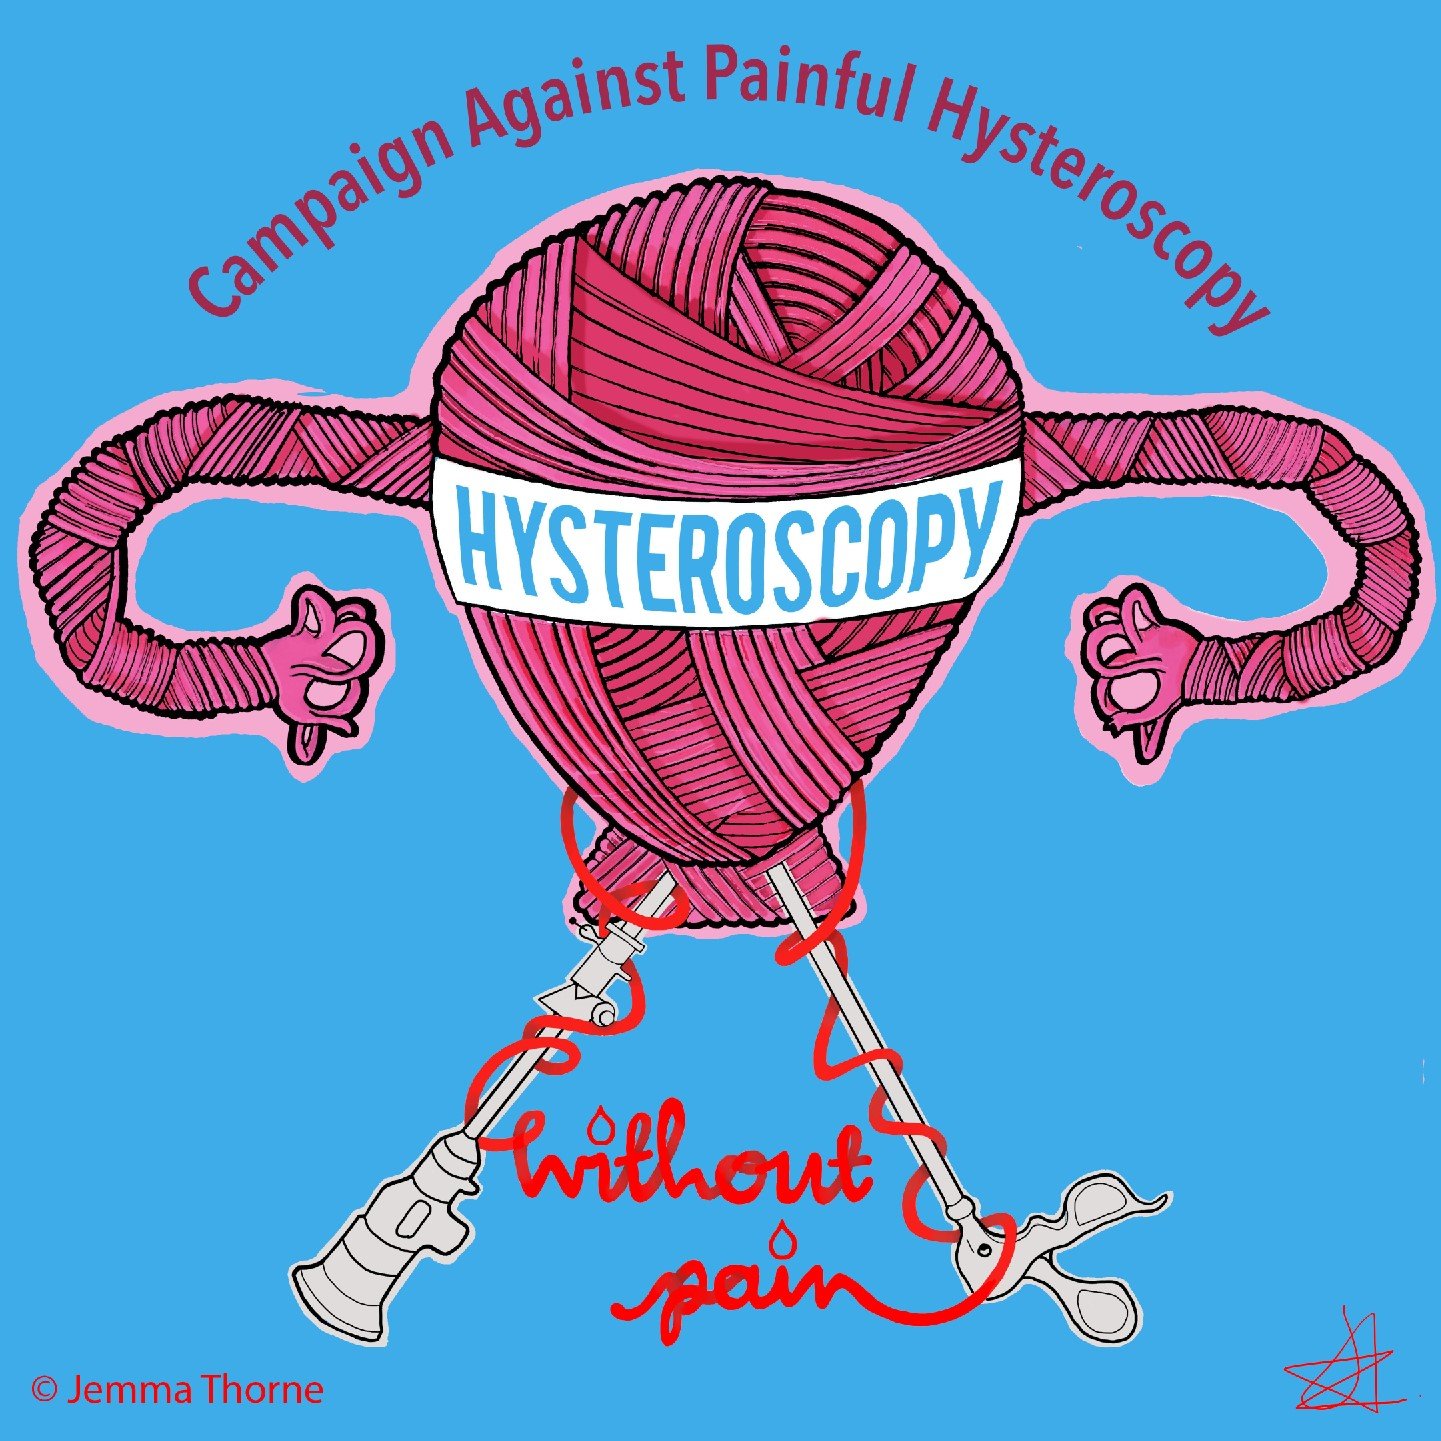 Campaign Against Painful Hysteroscopy - https://t.co/sarQA4aNIs  FACEBOOK private and public pages; Instagram; Tik Tok